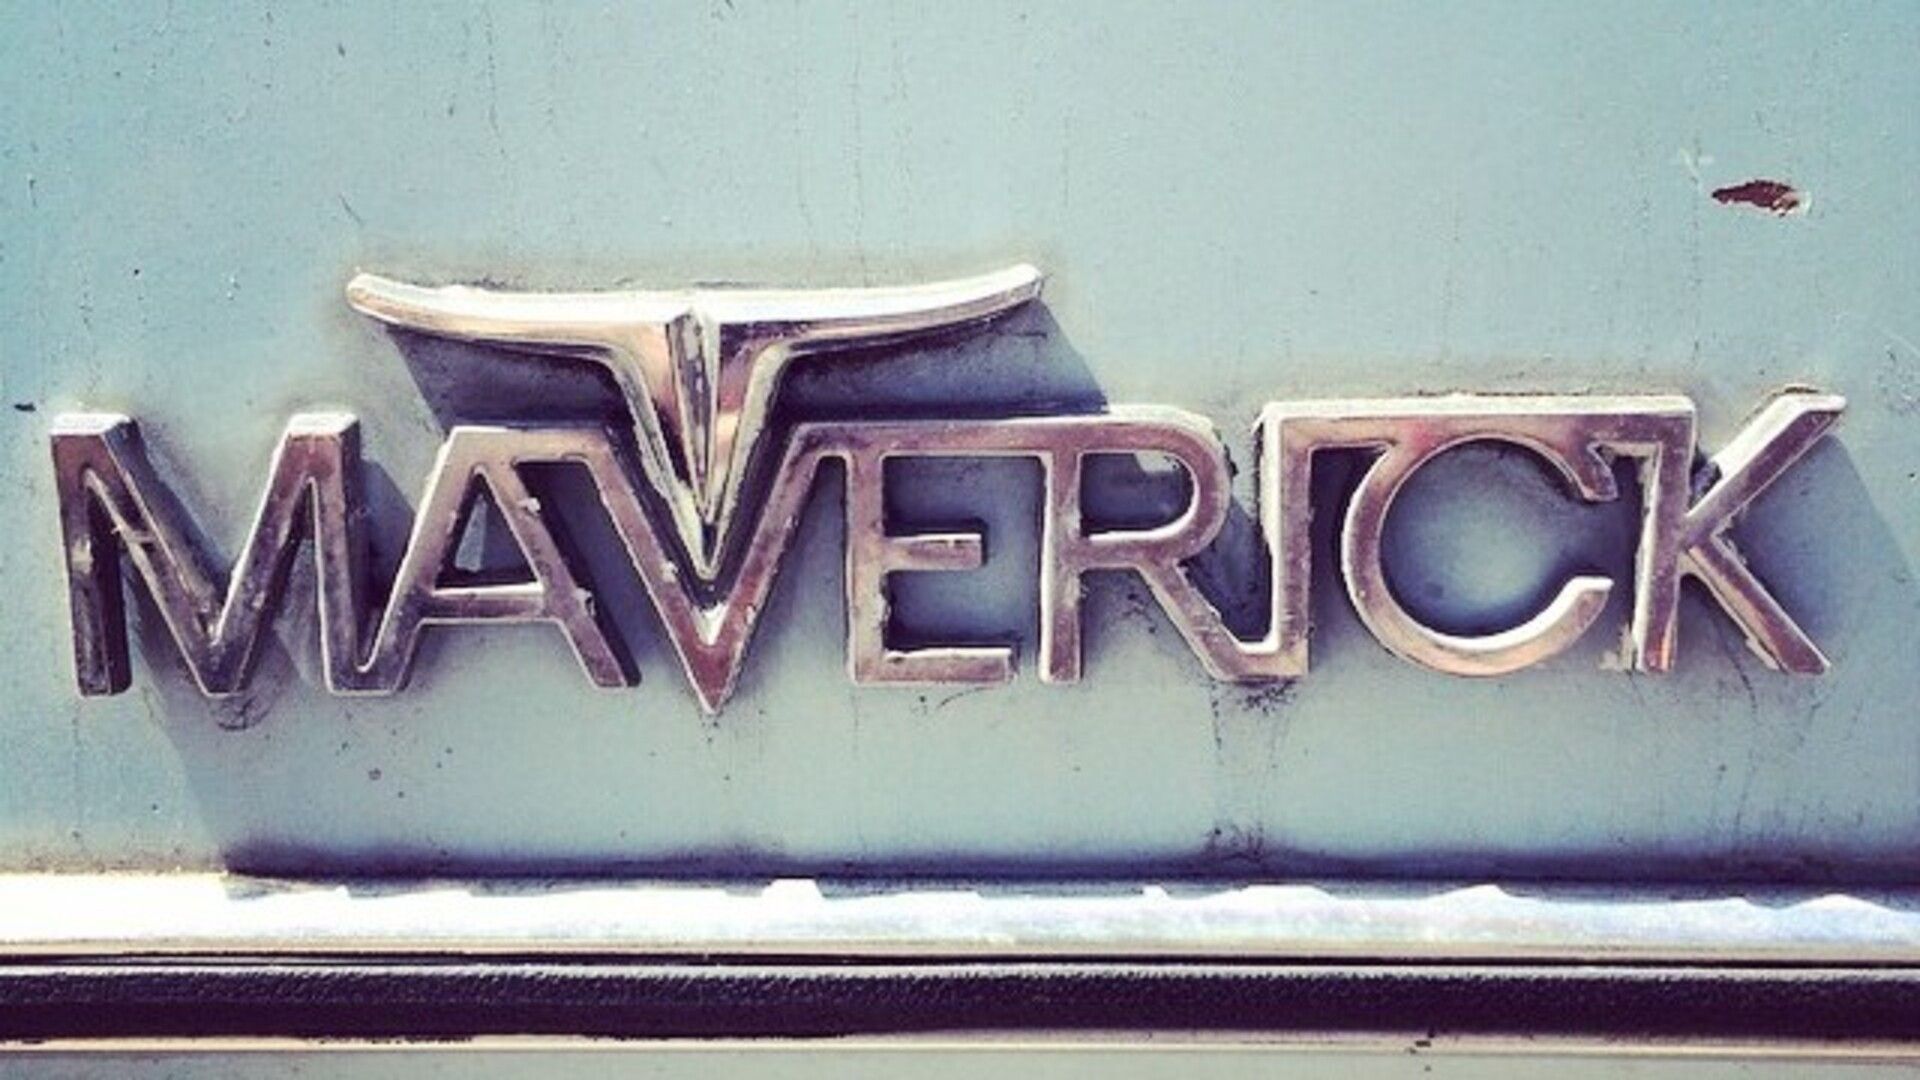 Nameplate badge from a 1970s Ford Maverick